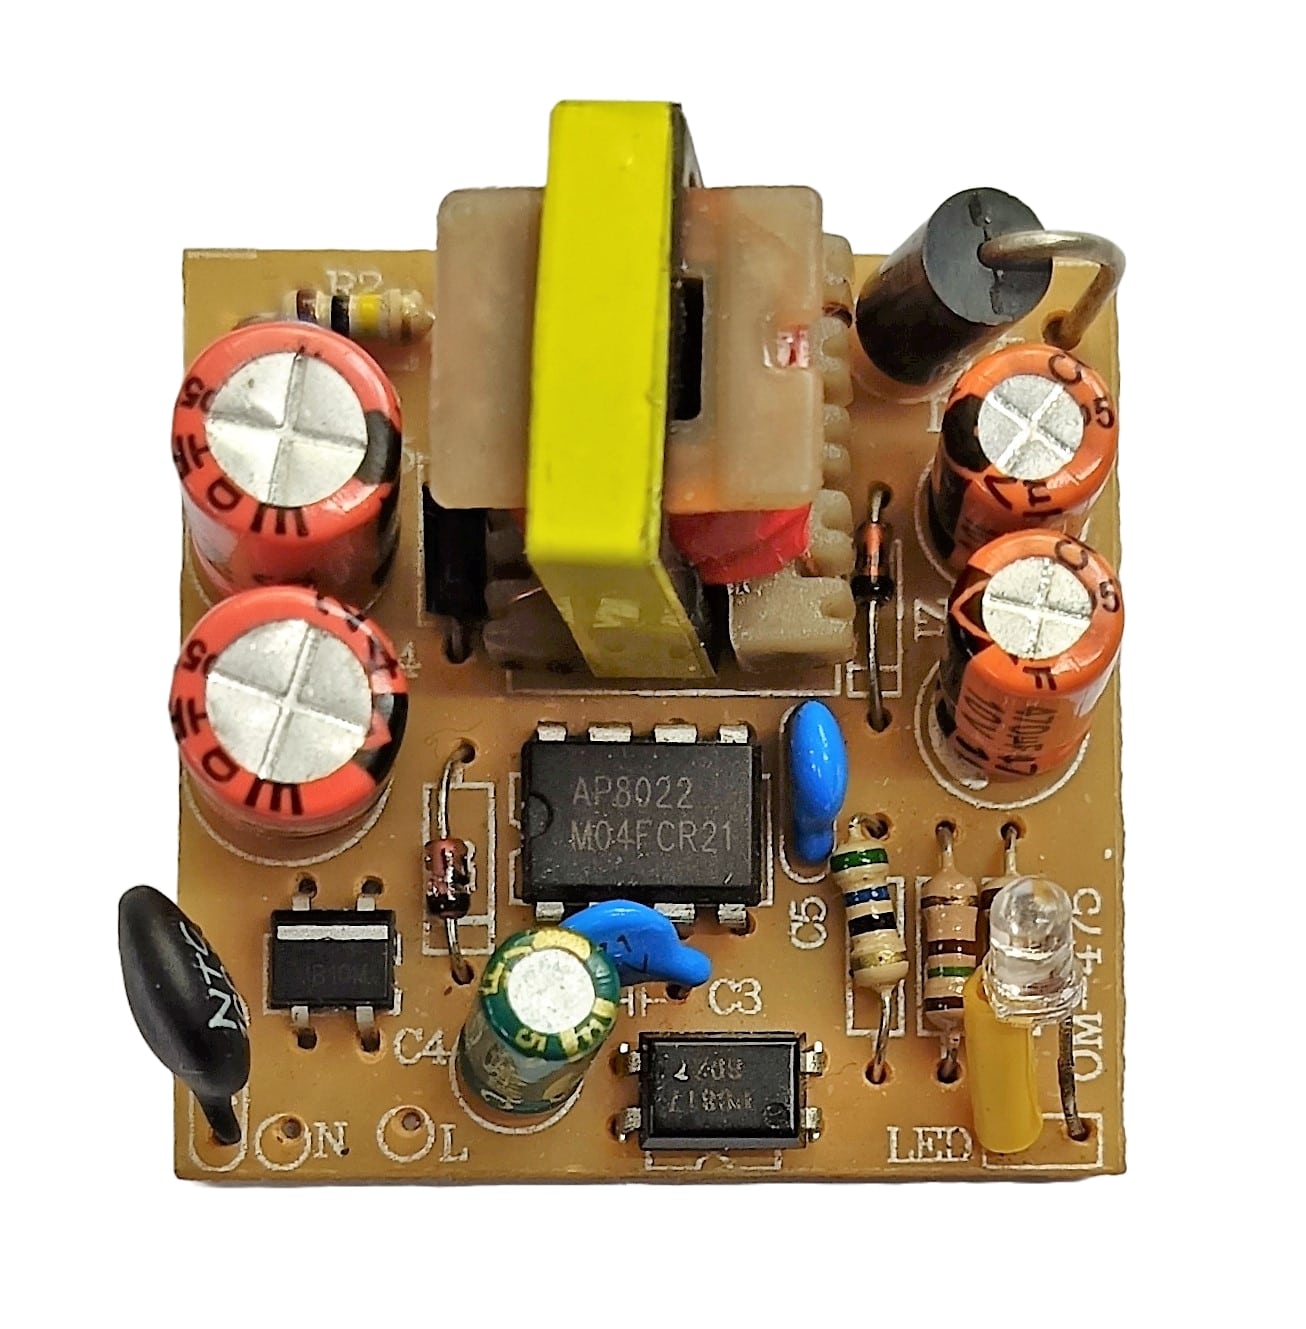 5V 2A DC output power supply circuit board